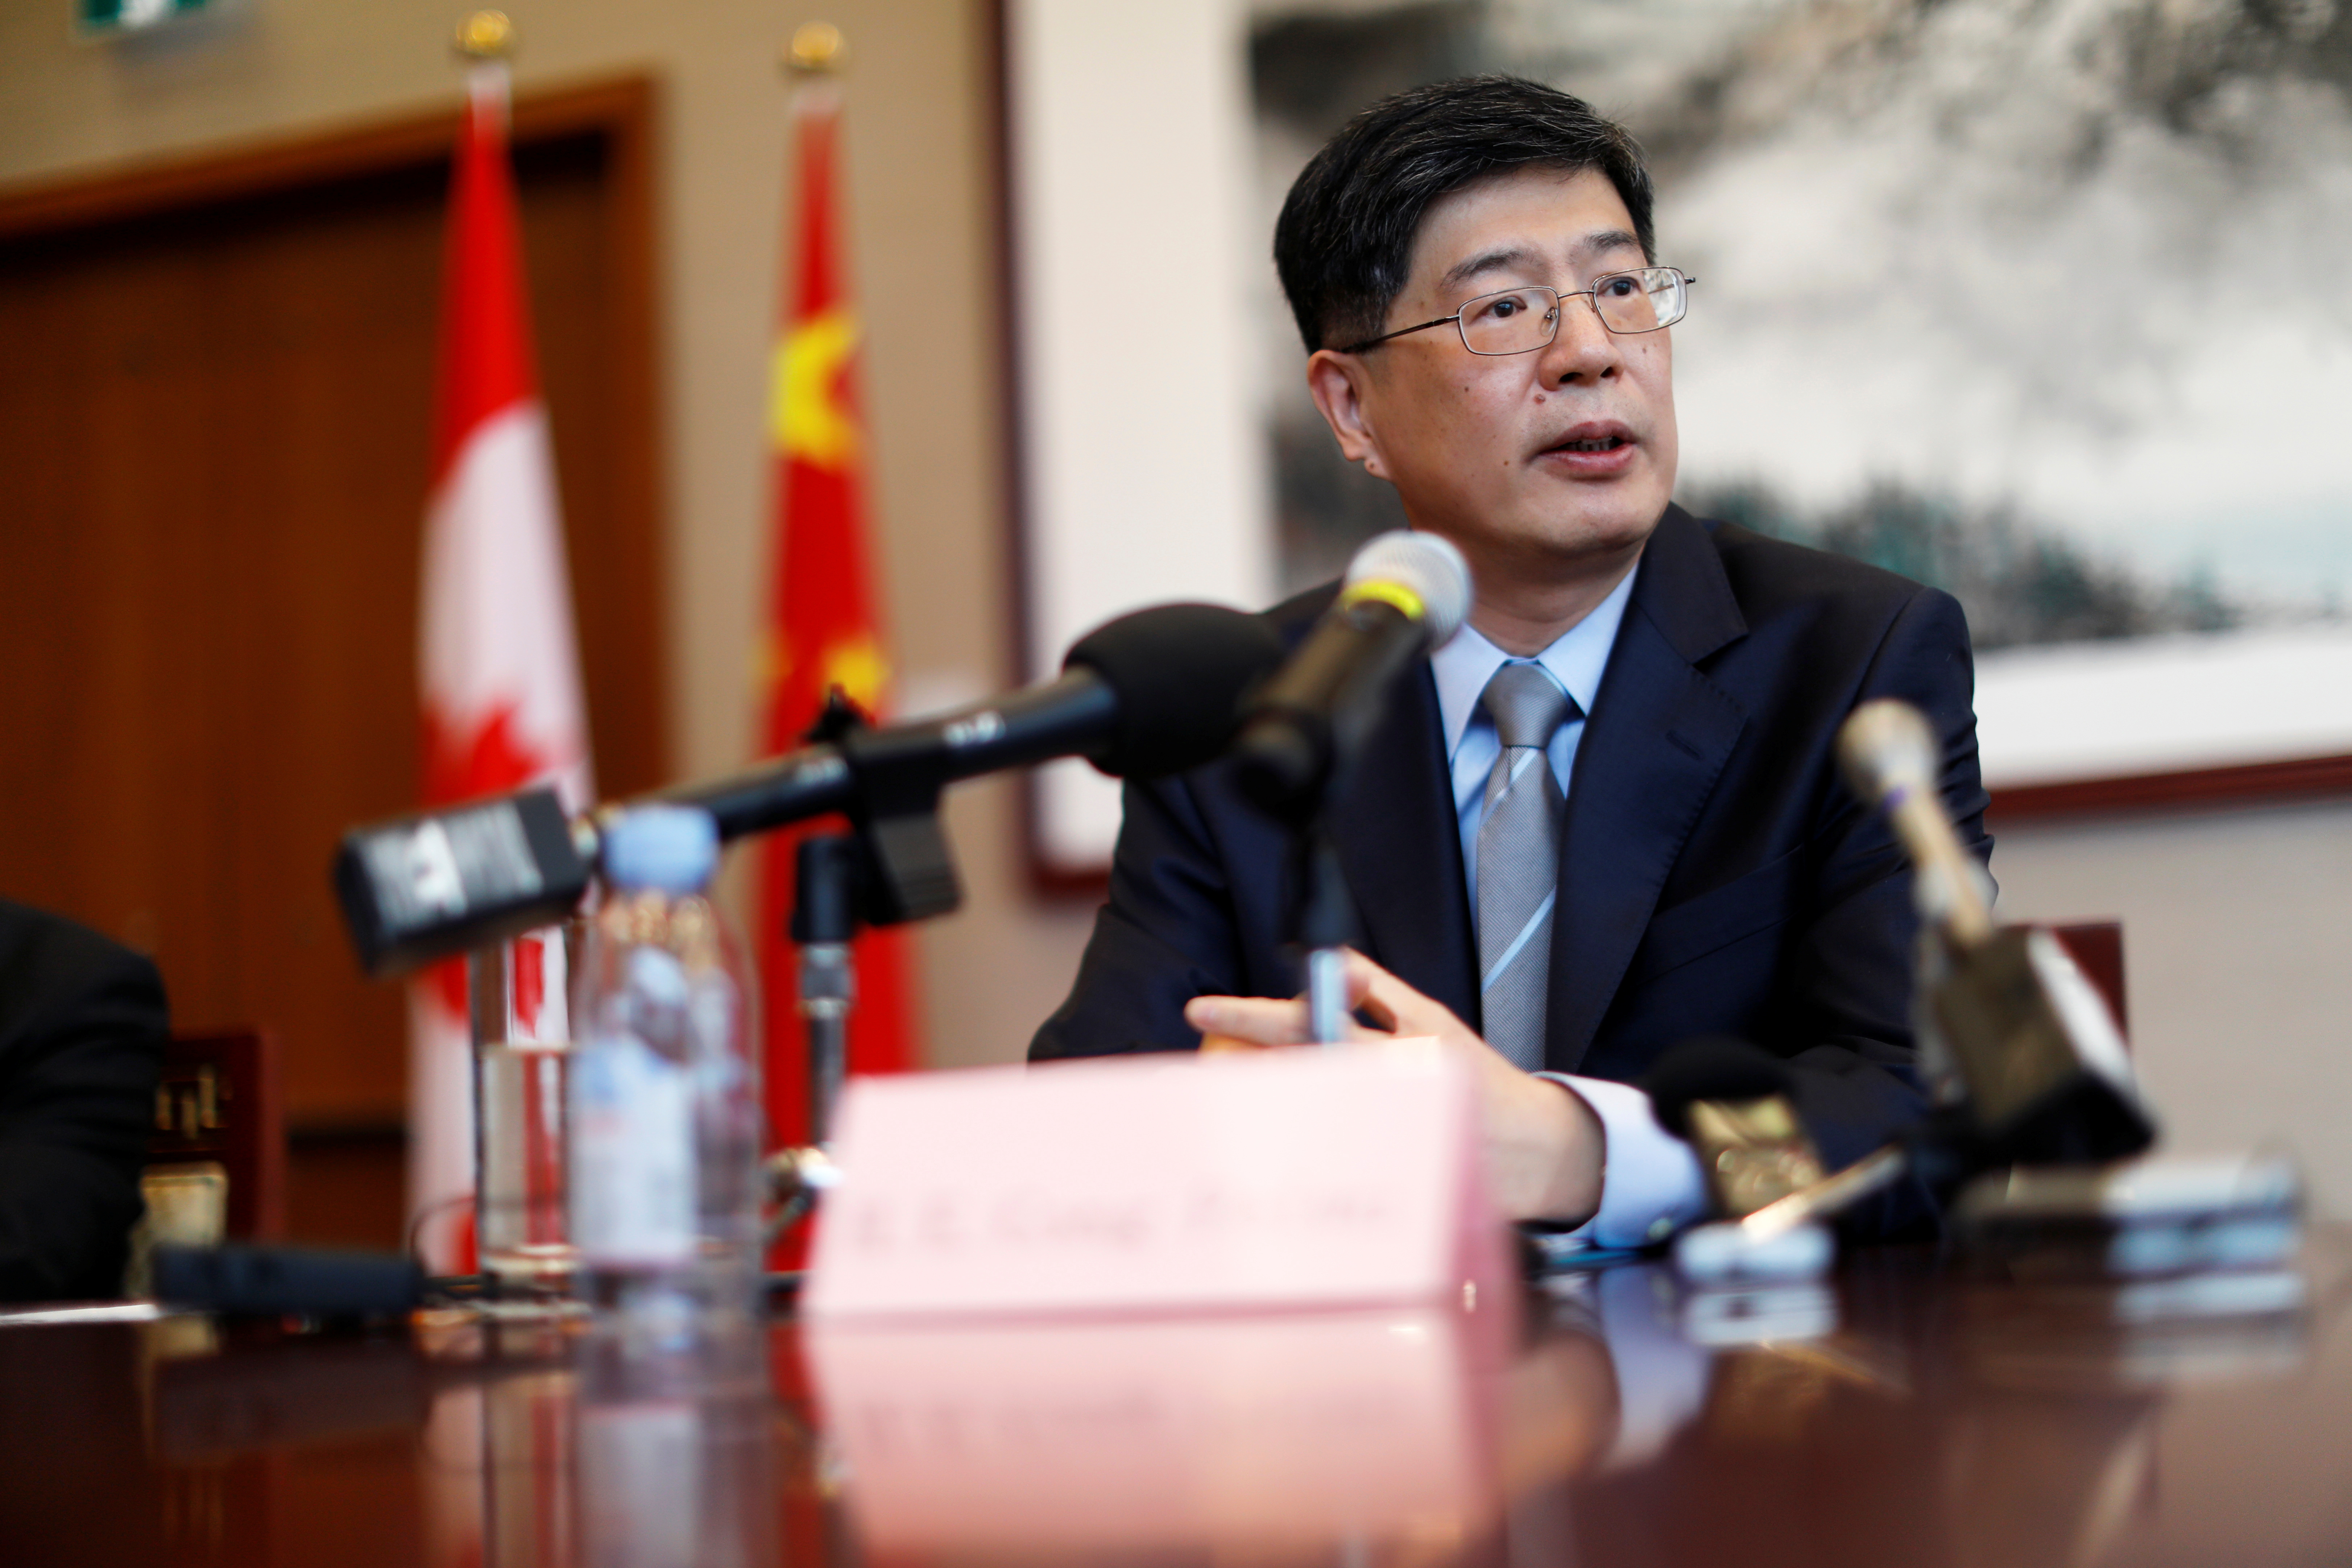 China's new ambassador to Canada Cong Peiwu speaks during a news conference for a small group of reporters at the Chinese Embassy in Ottawa